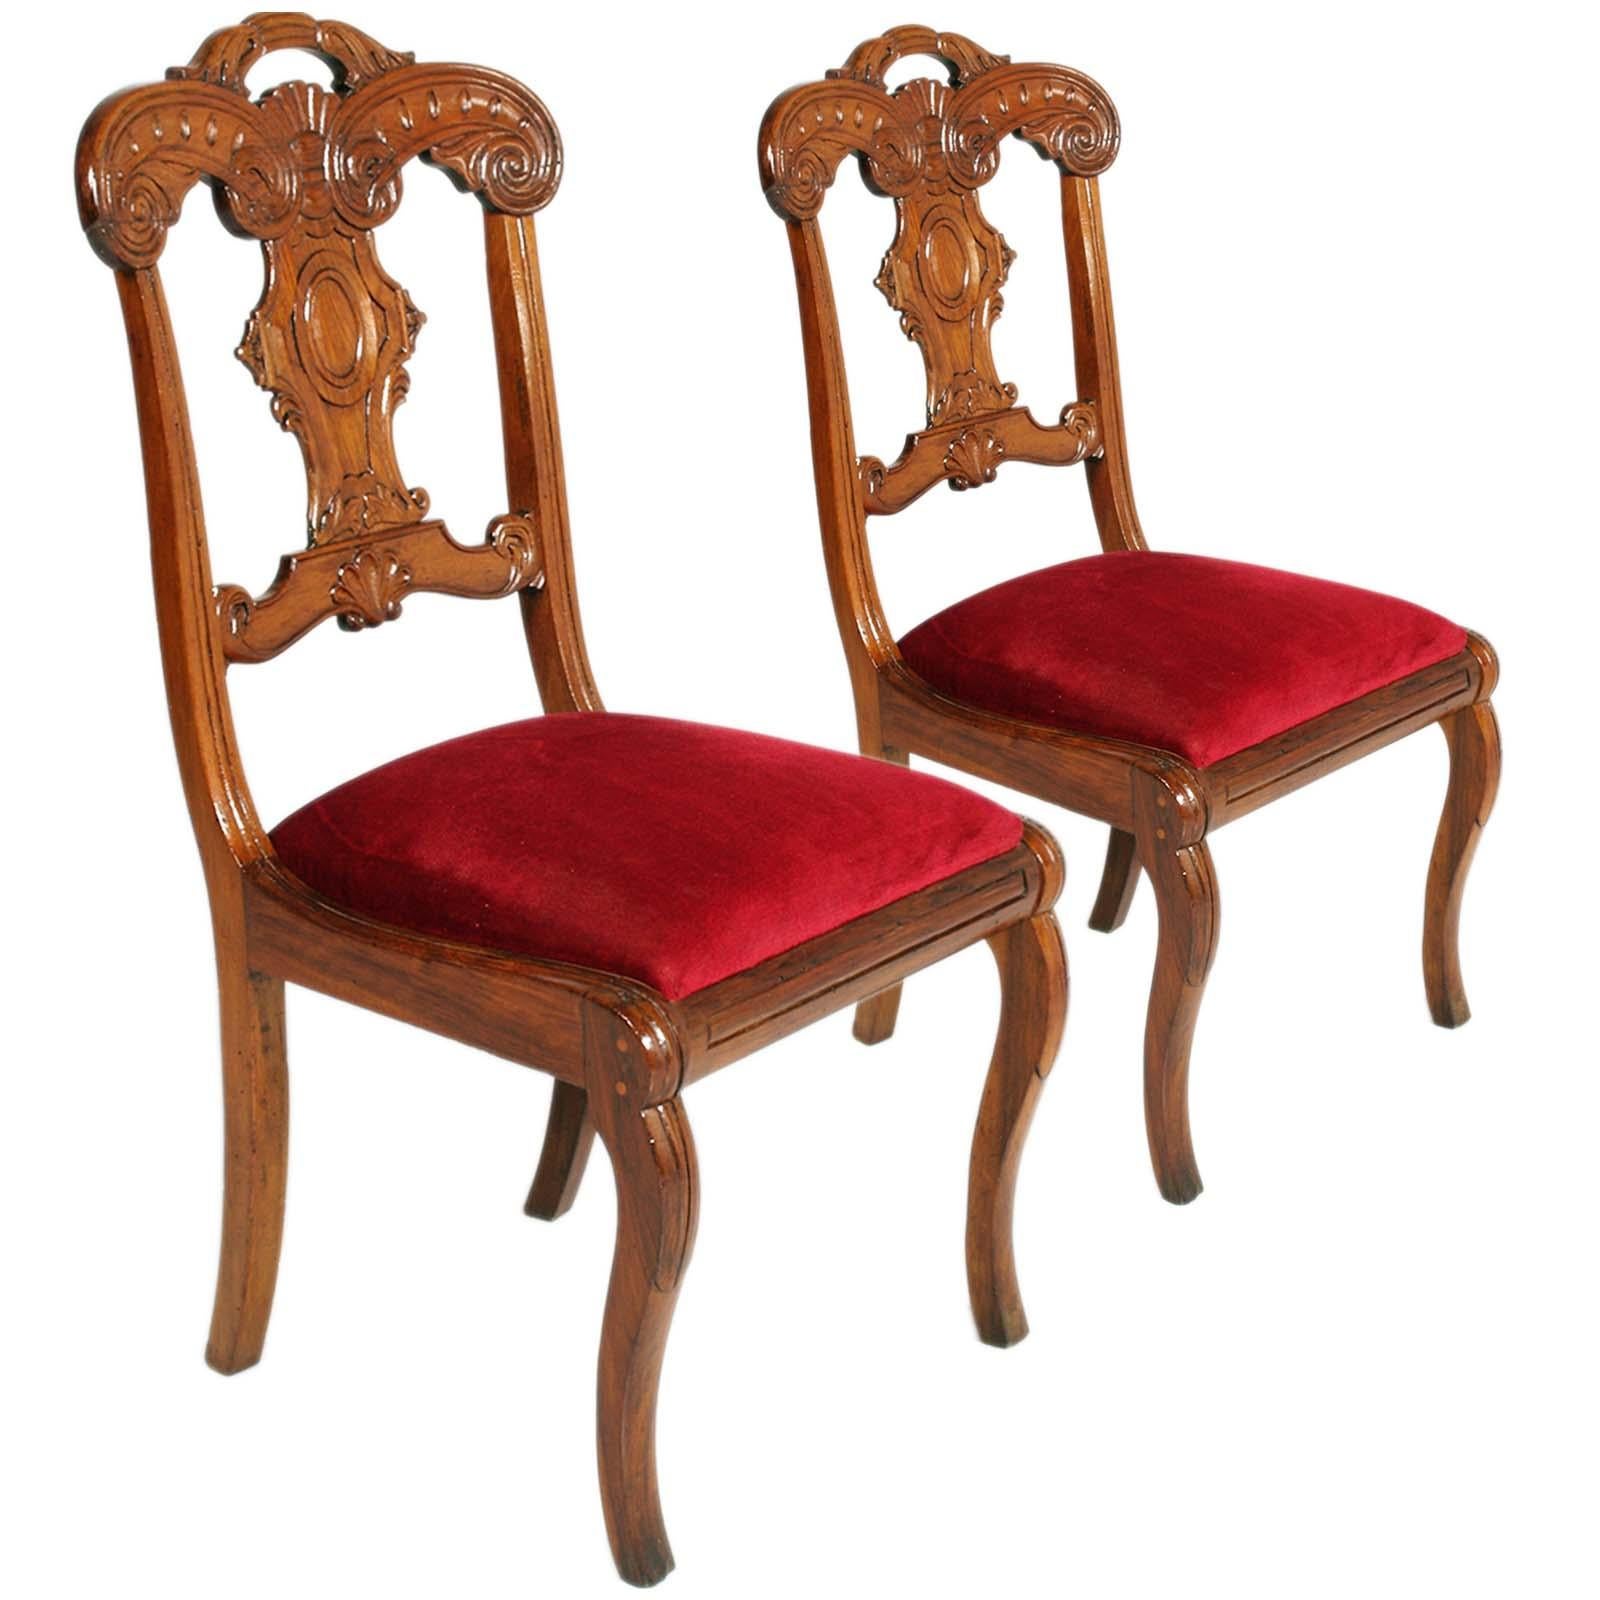 Exquisite pair of hand-carved French side chairs from the early 18th century Charles X, maple wood, recently reupholstered in red velvet and wax polished, belonged to an aristocratic Venetian family from Asolo

The Charles X style is typical of